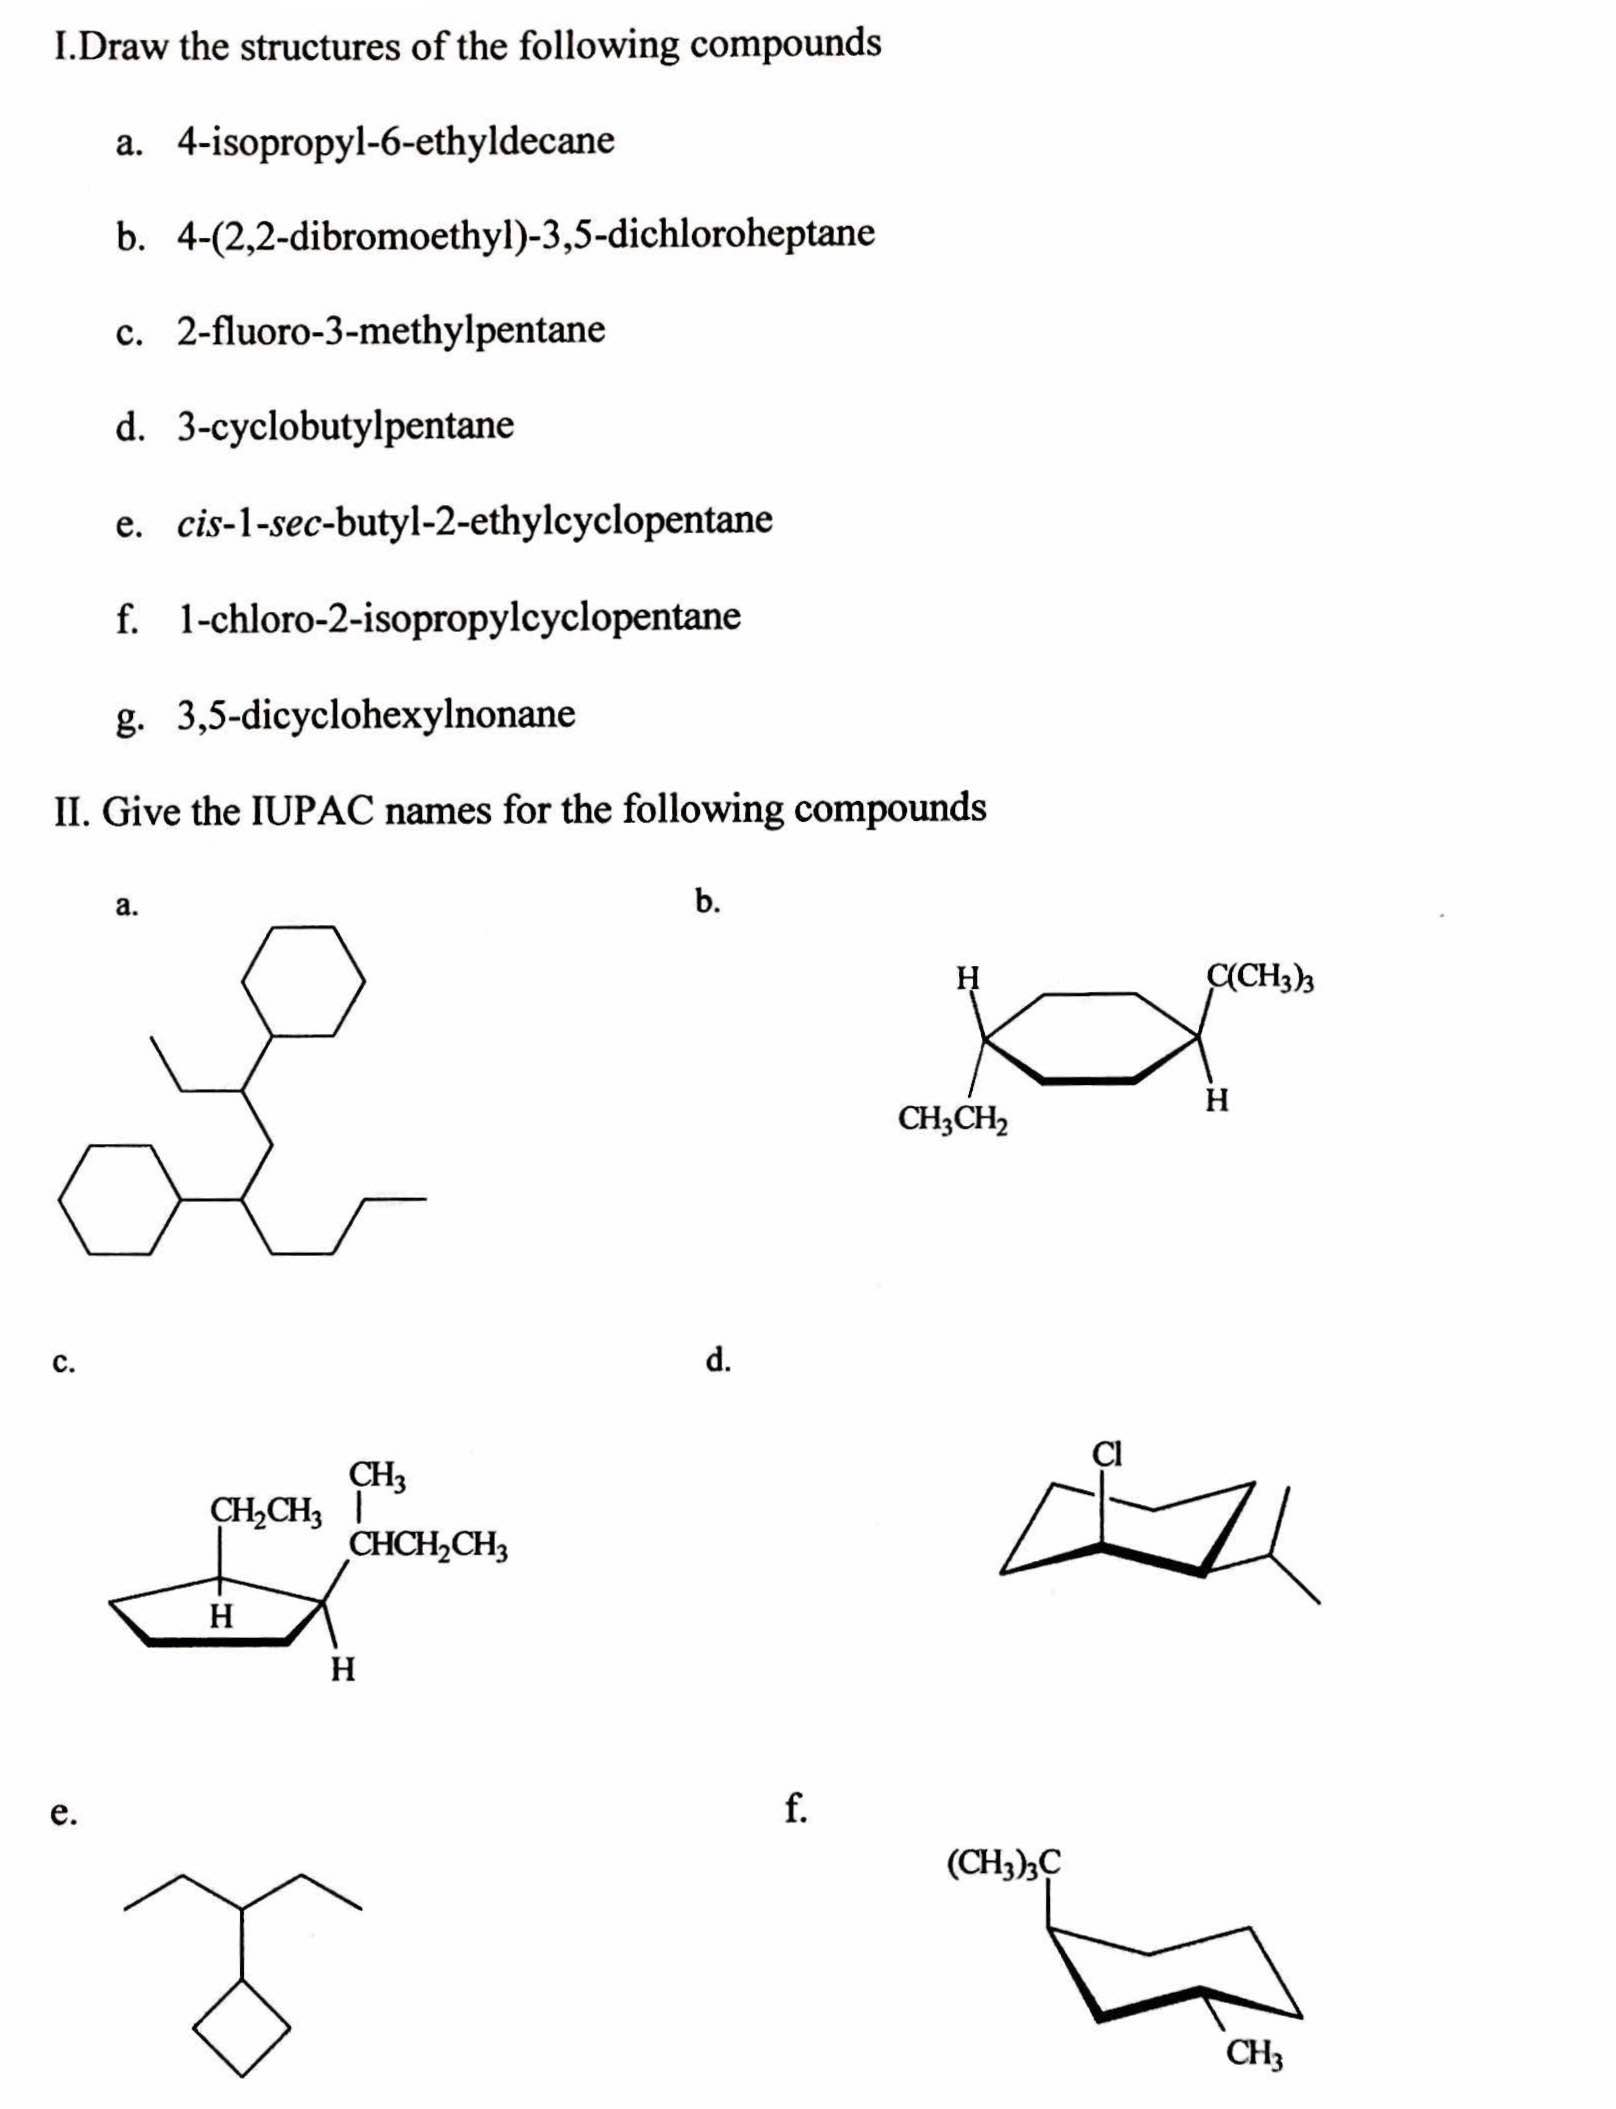 Solved Draw the structures of the following compounds & give